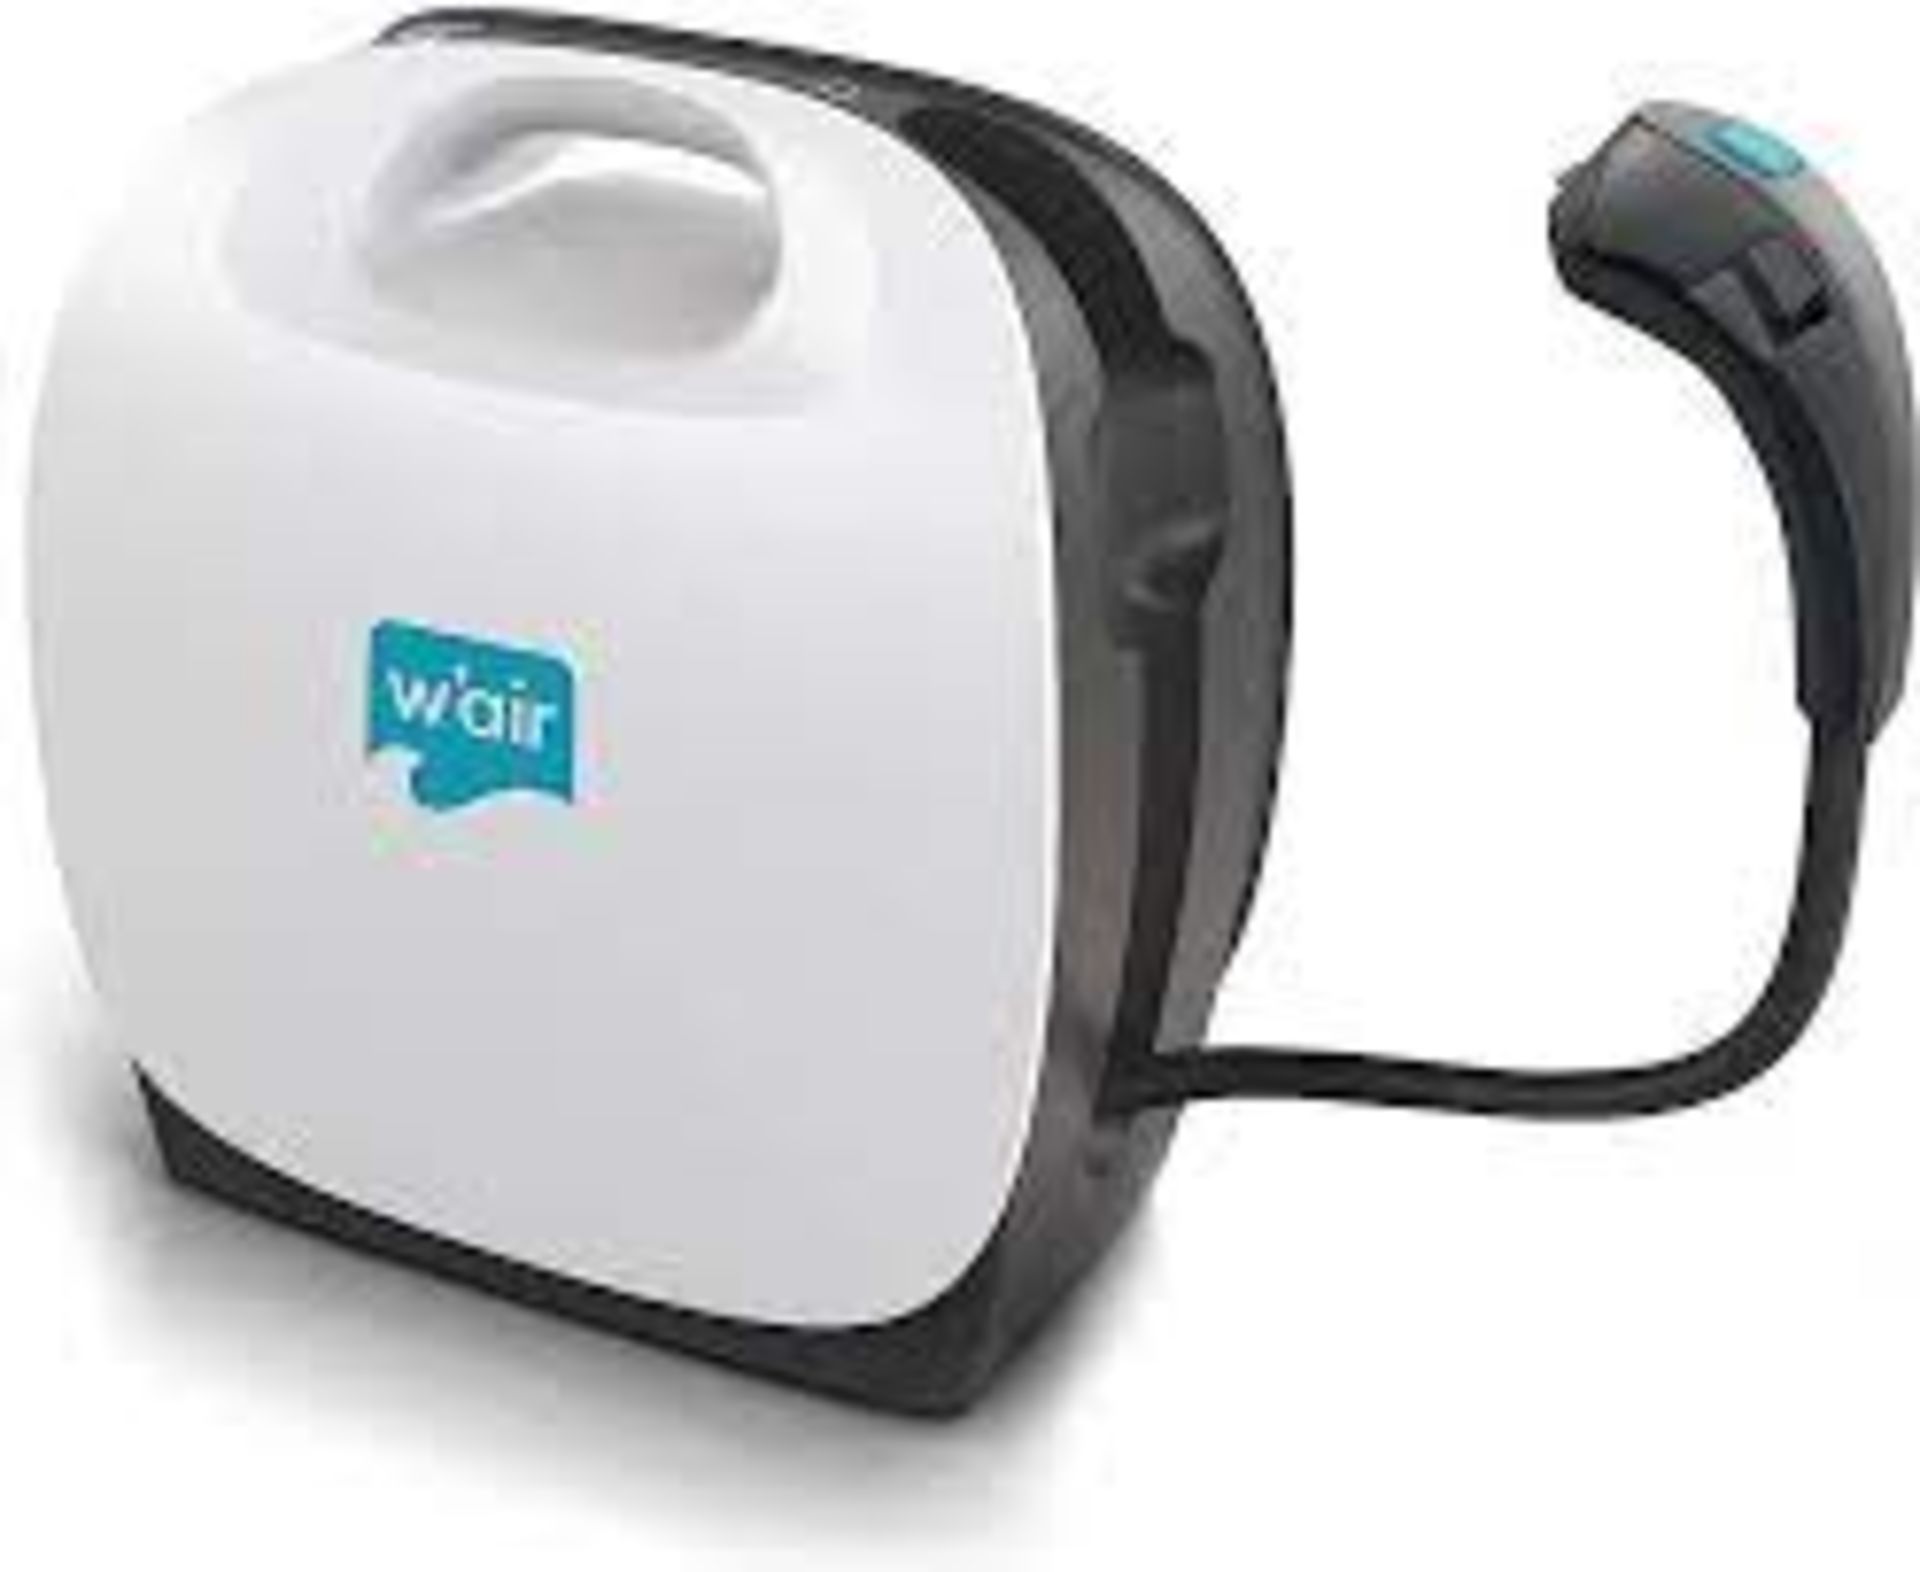 10 X BRAND NEW W'AIR SNEAKER CLEANING SYSTEMS RRP £299, The w'air uses hydrodynamic technology - Image 6 of 6